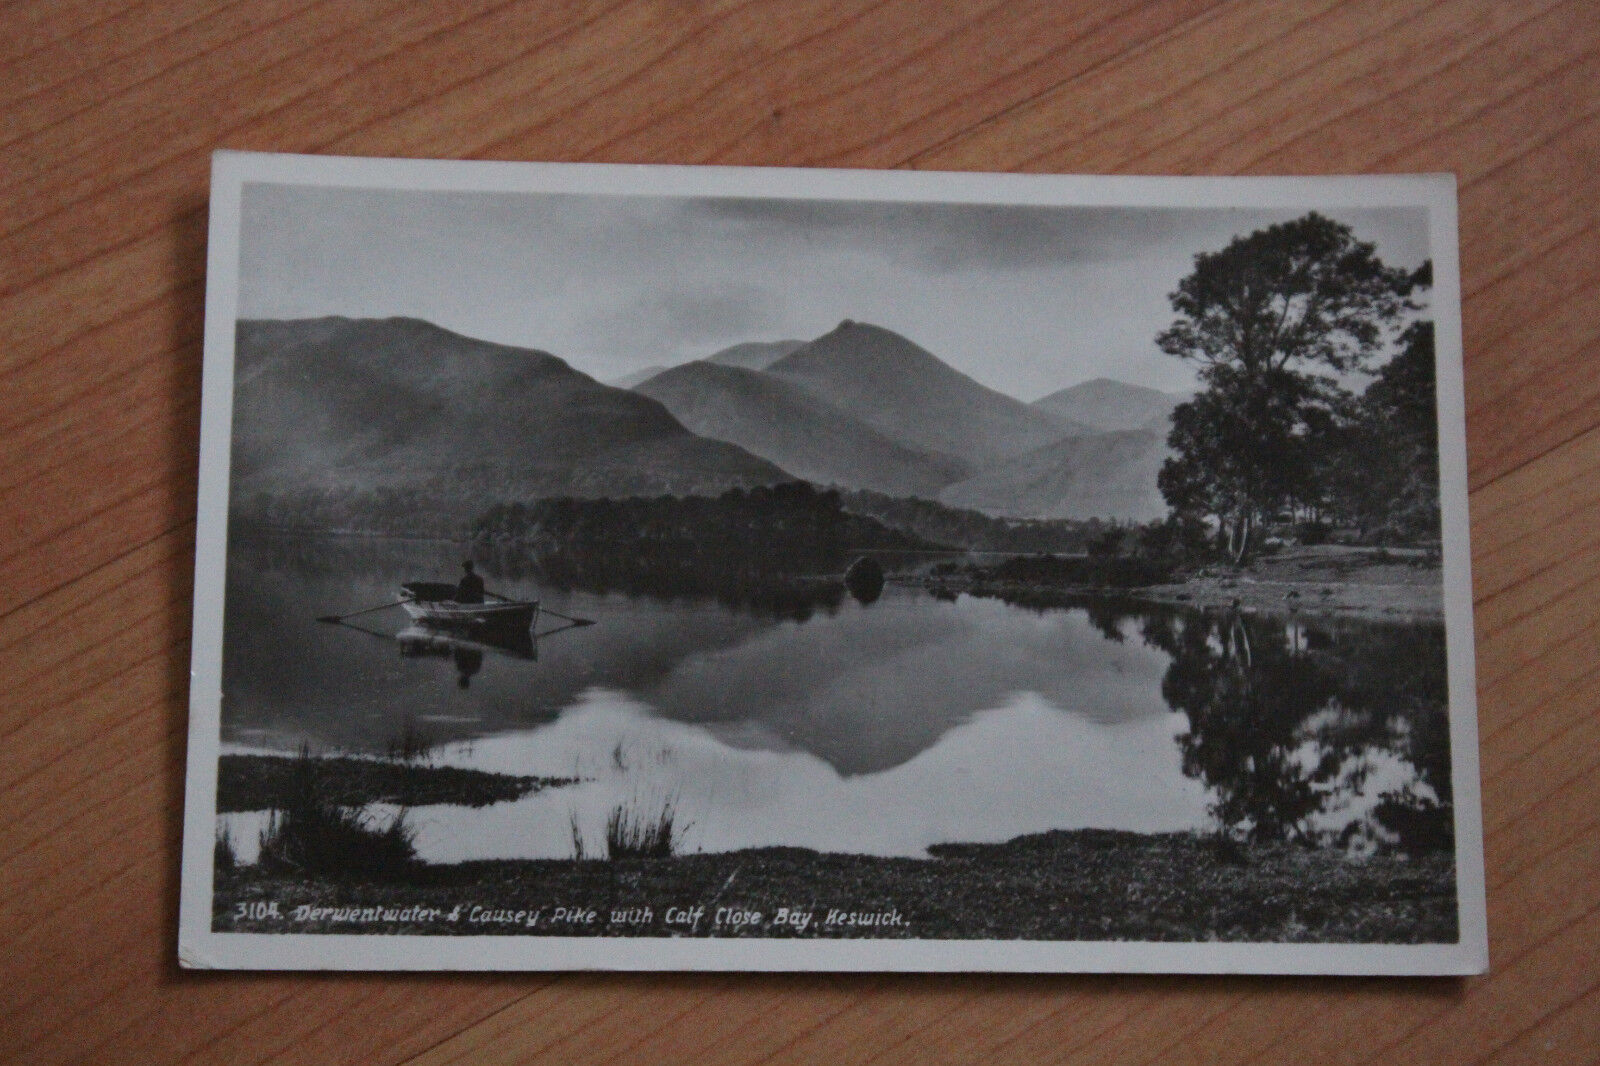 House Clearance - Service Derwentwater & Causey Pike with Calf Close Bay Keswick Service